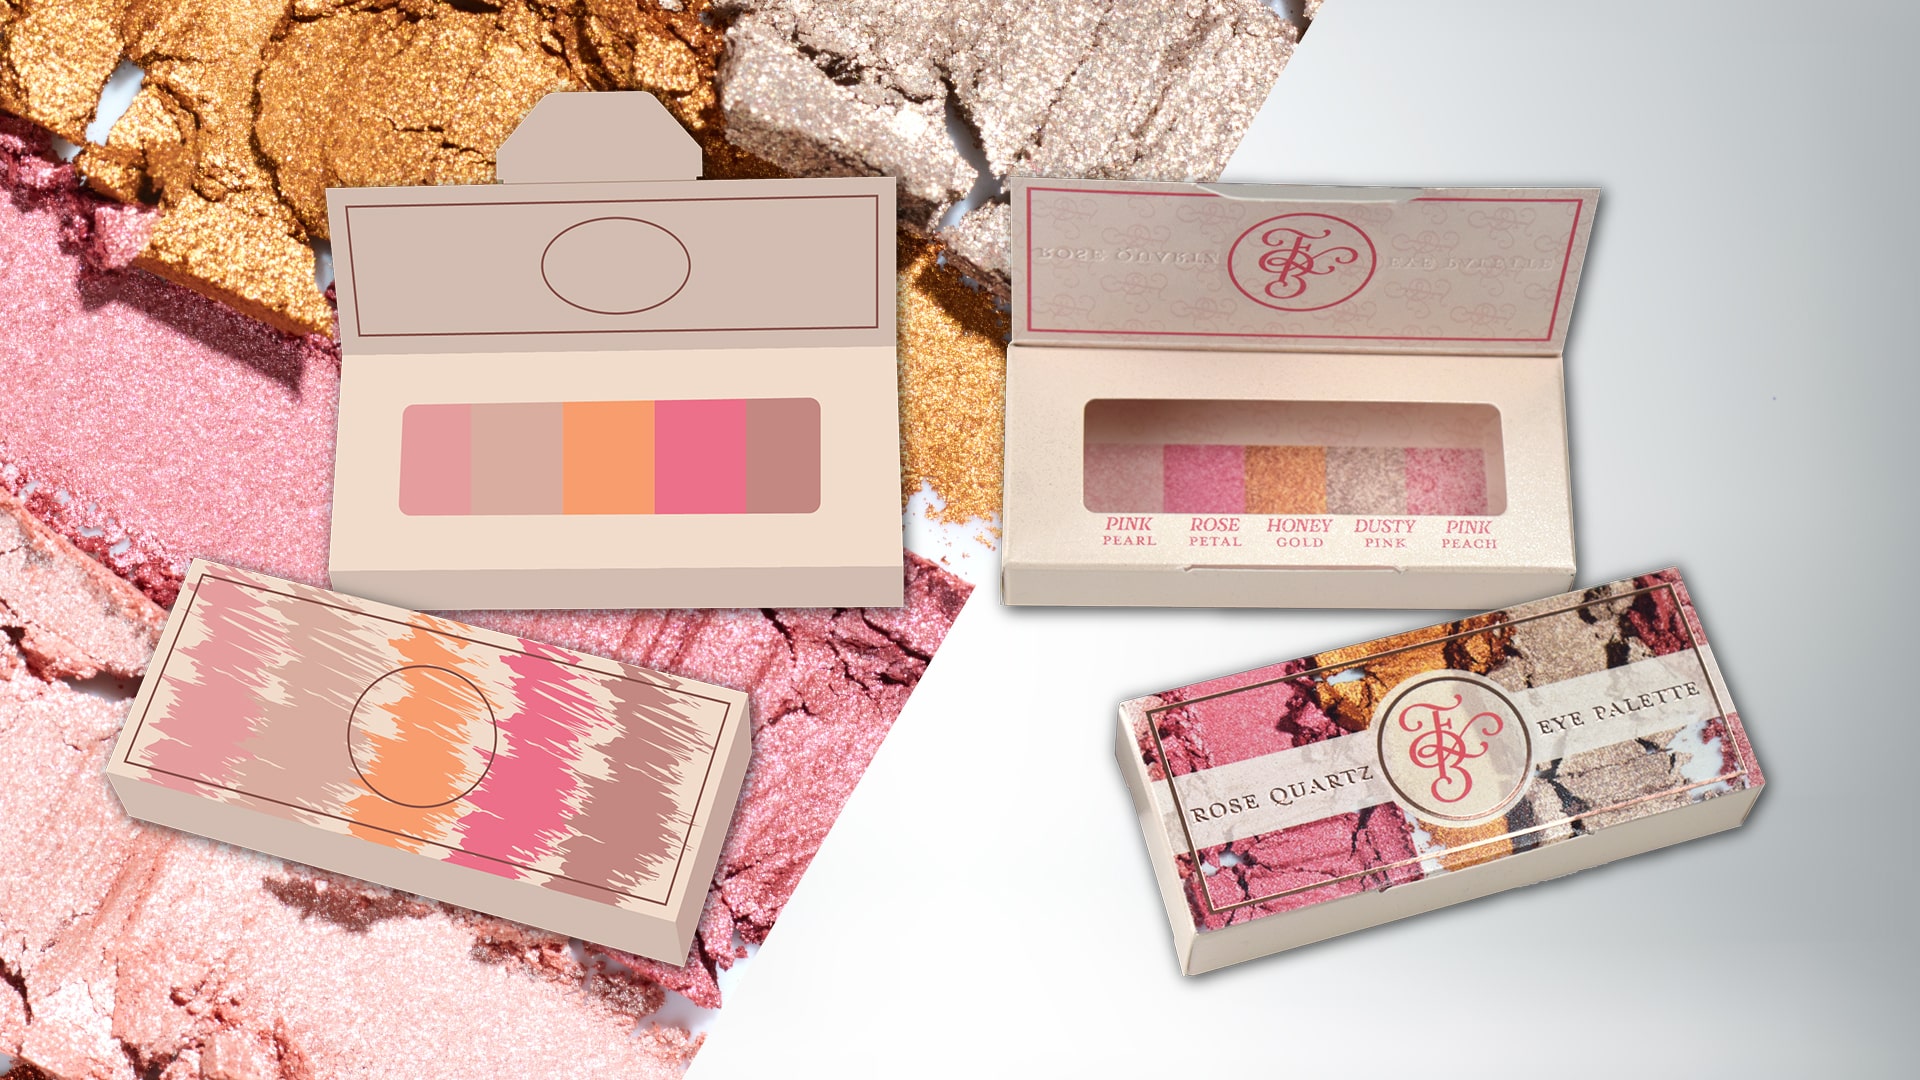 The image shows a collection of cosmetic palettes with various shades of eyeshadows and blushes, scattered on a textured backdrop of crushed makeup.